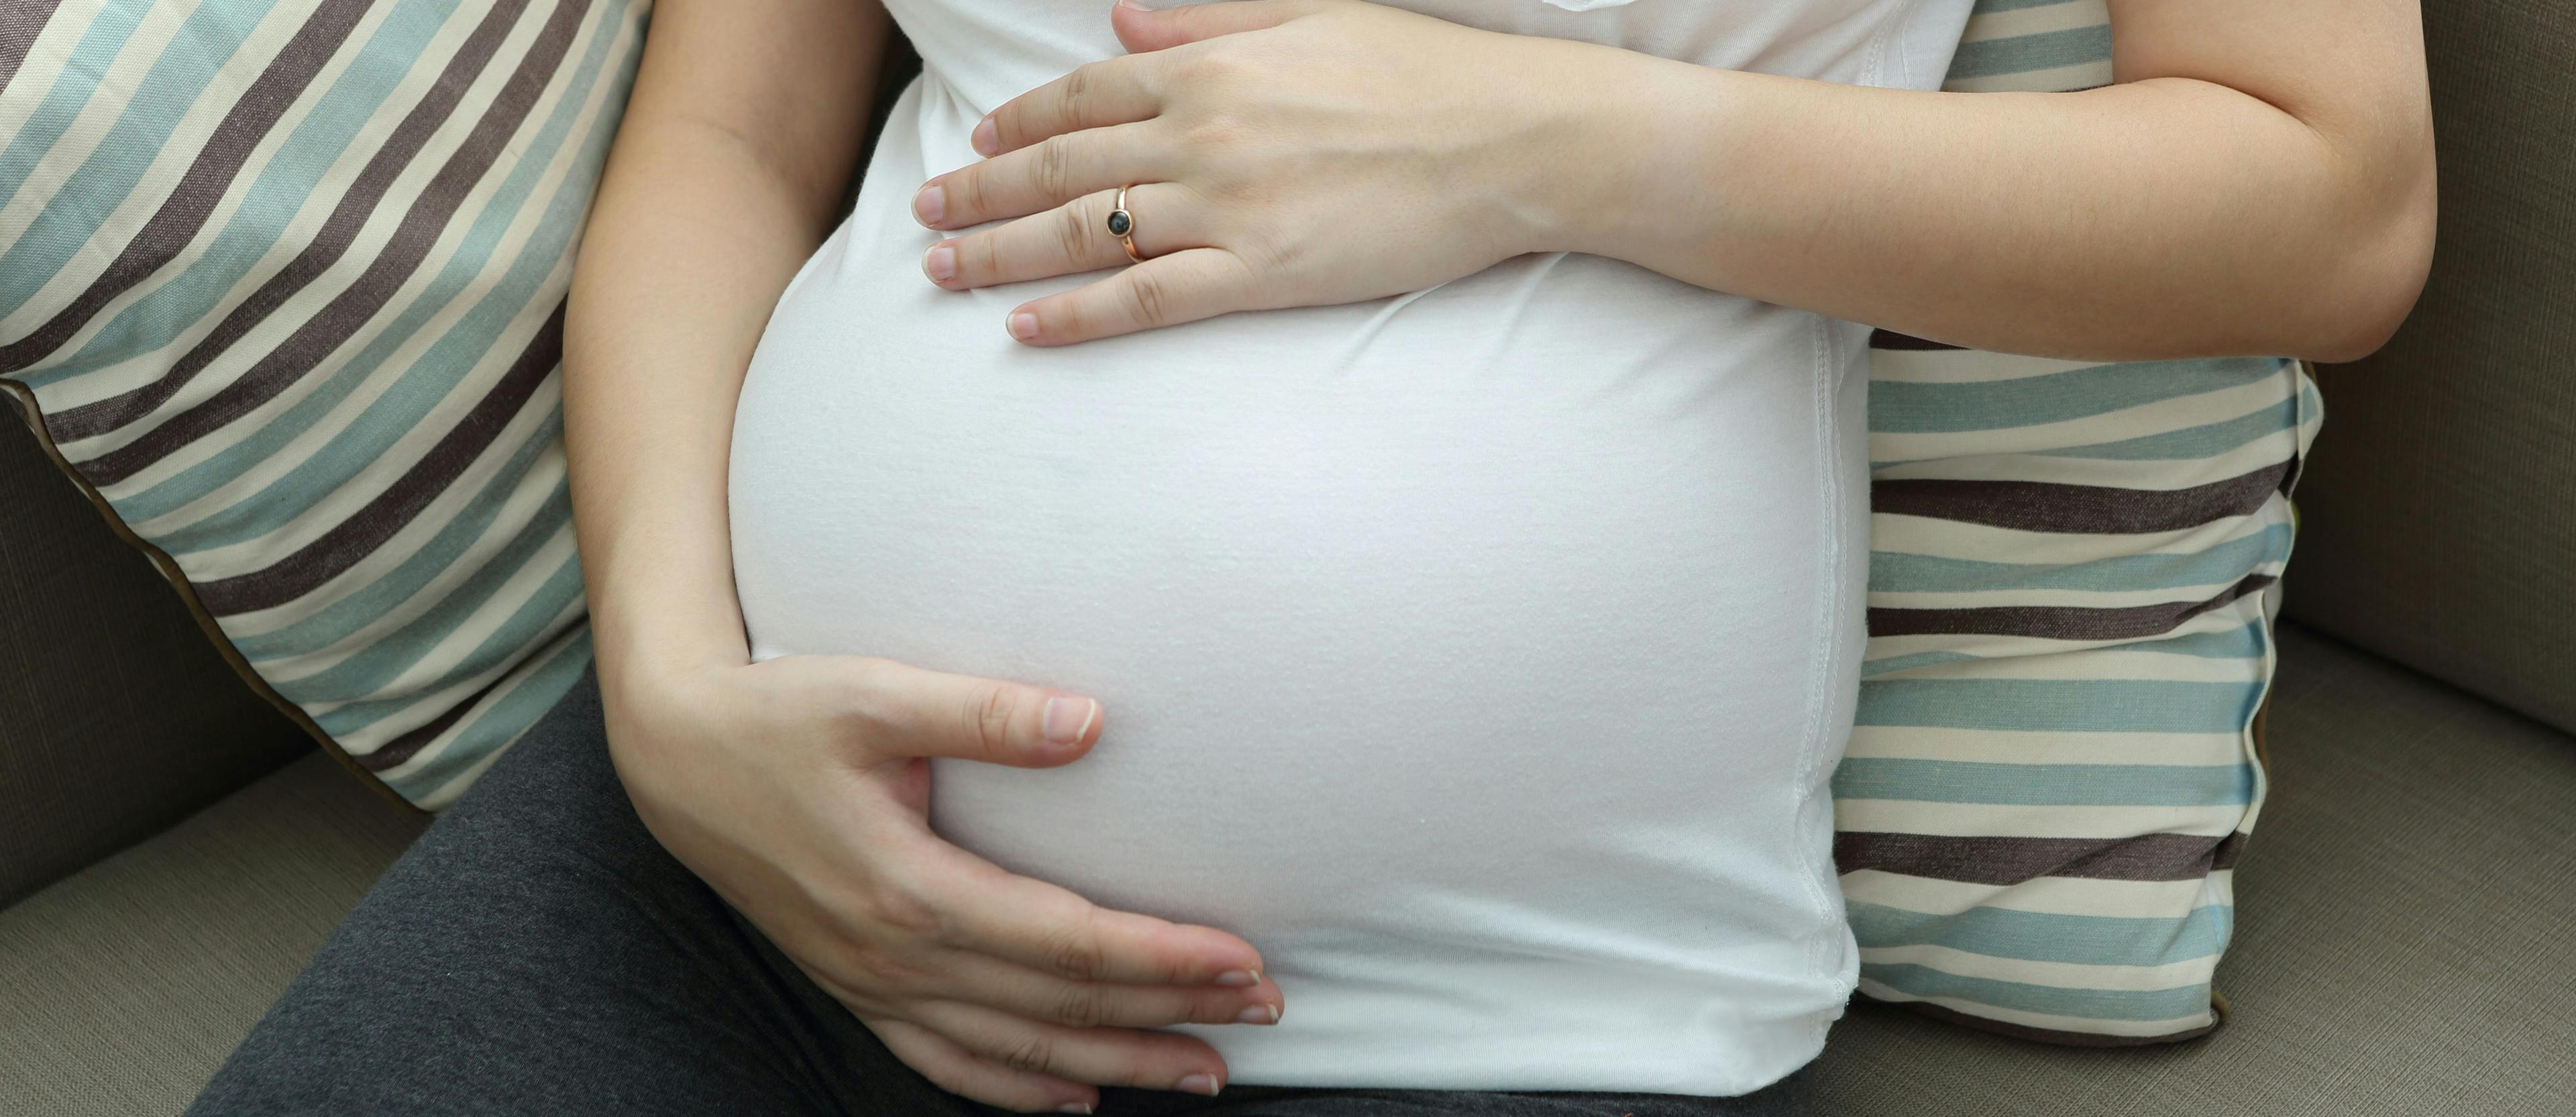 4 Ways Pharmacists Can Help Obese Women Have Healthy Pregnancies